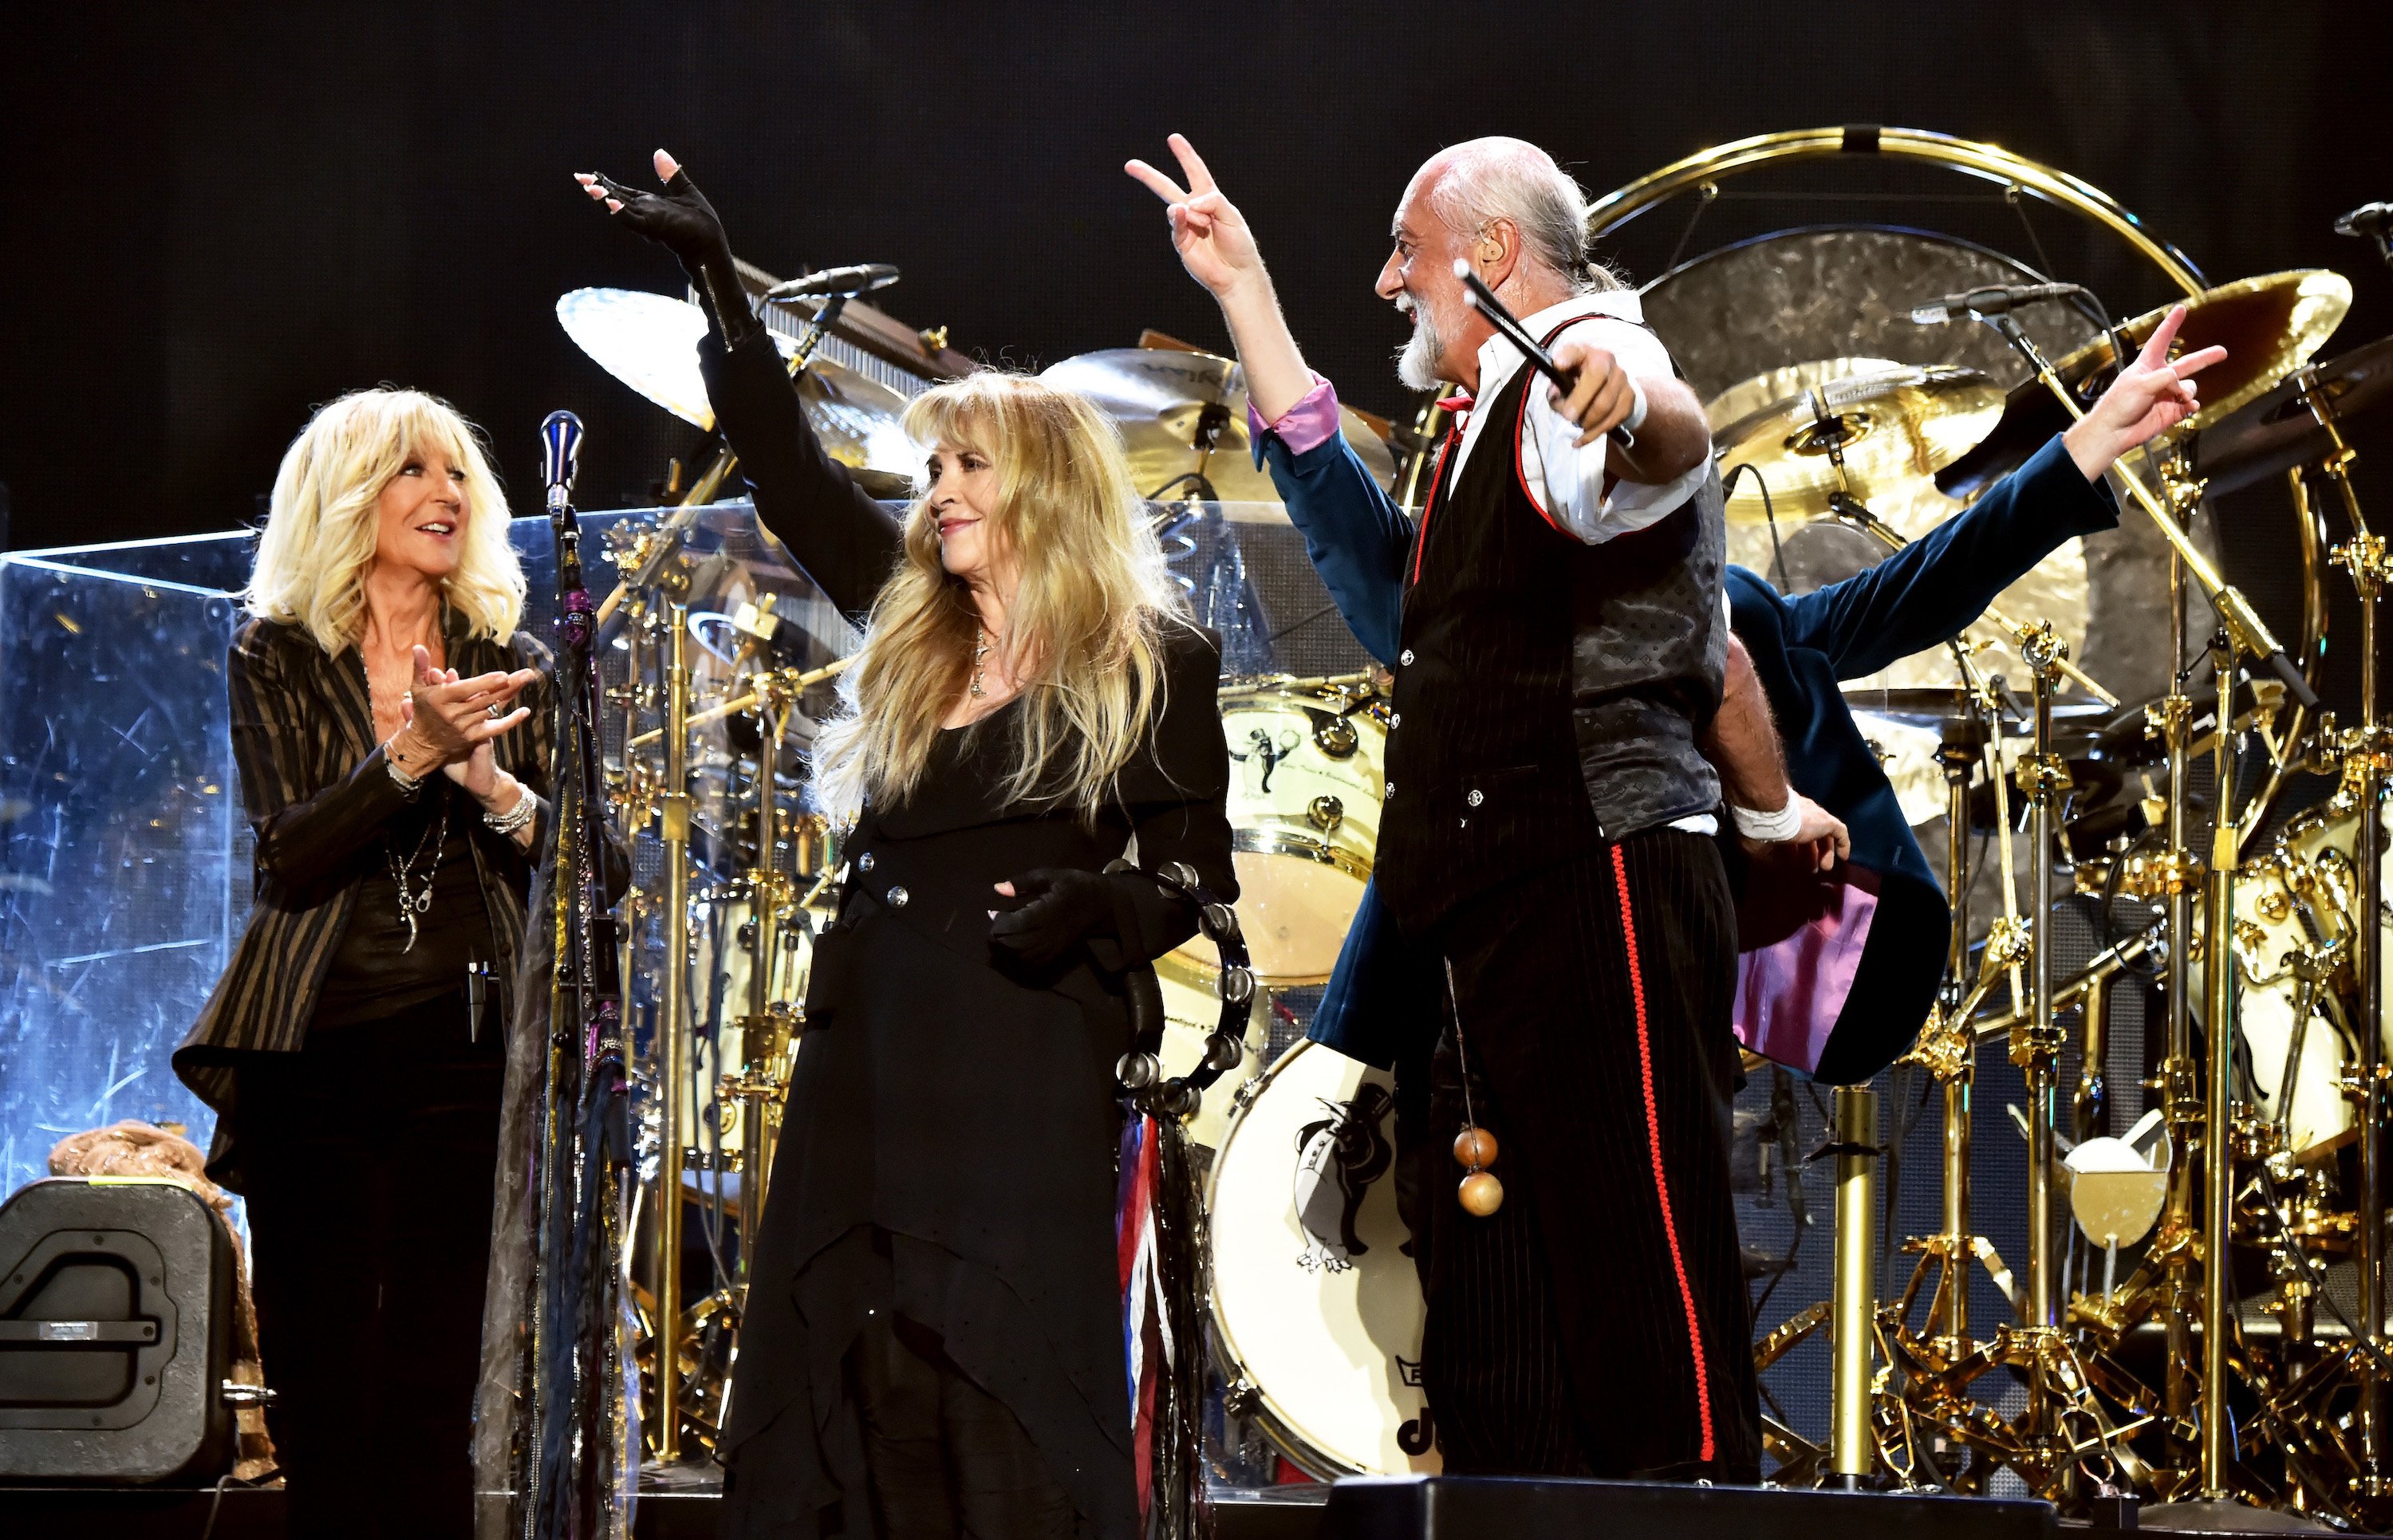 Fleetwood Mac’s Christine McVie is still'[Brought] to Tears’ of some Beatles songs